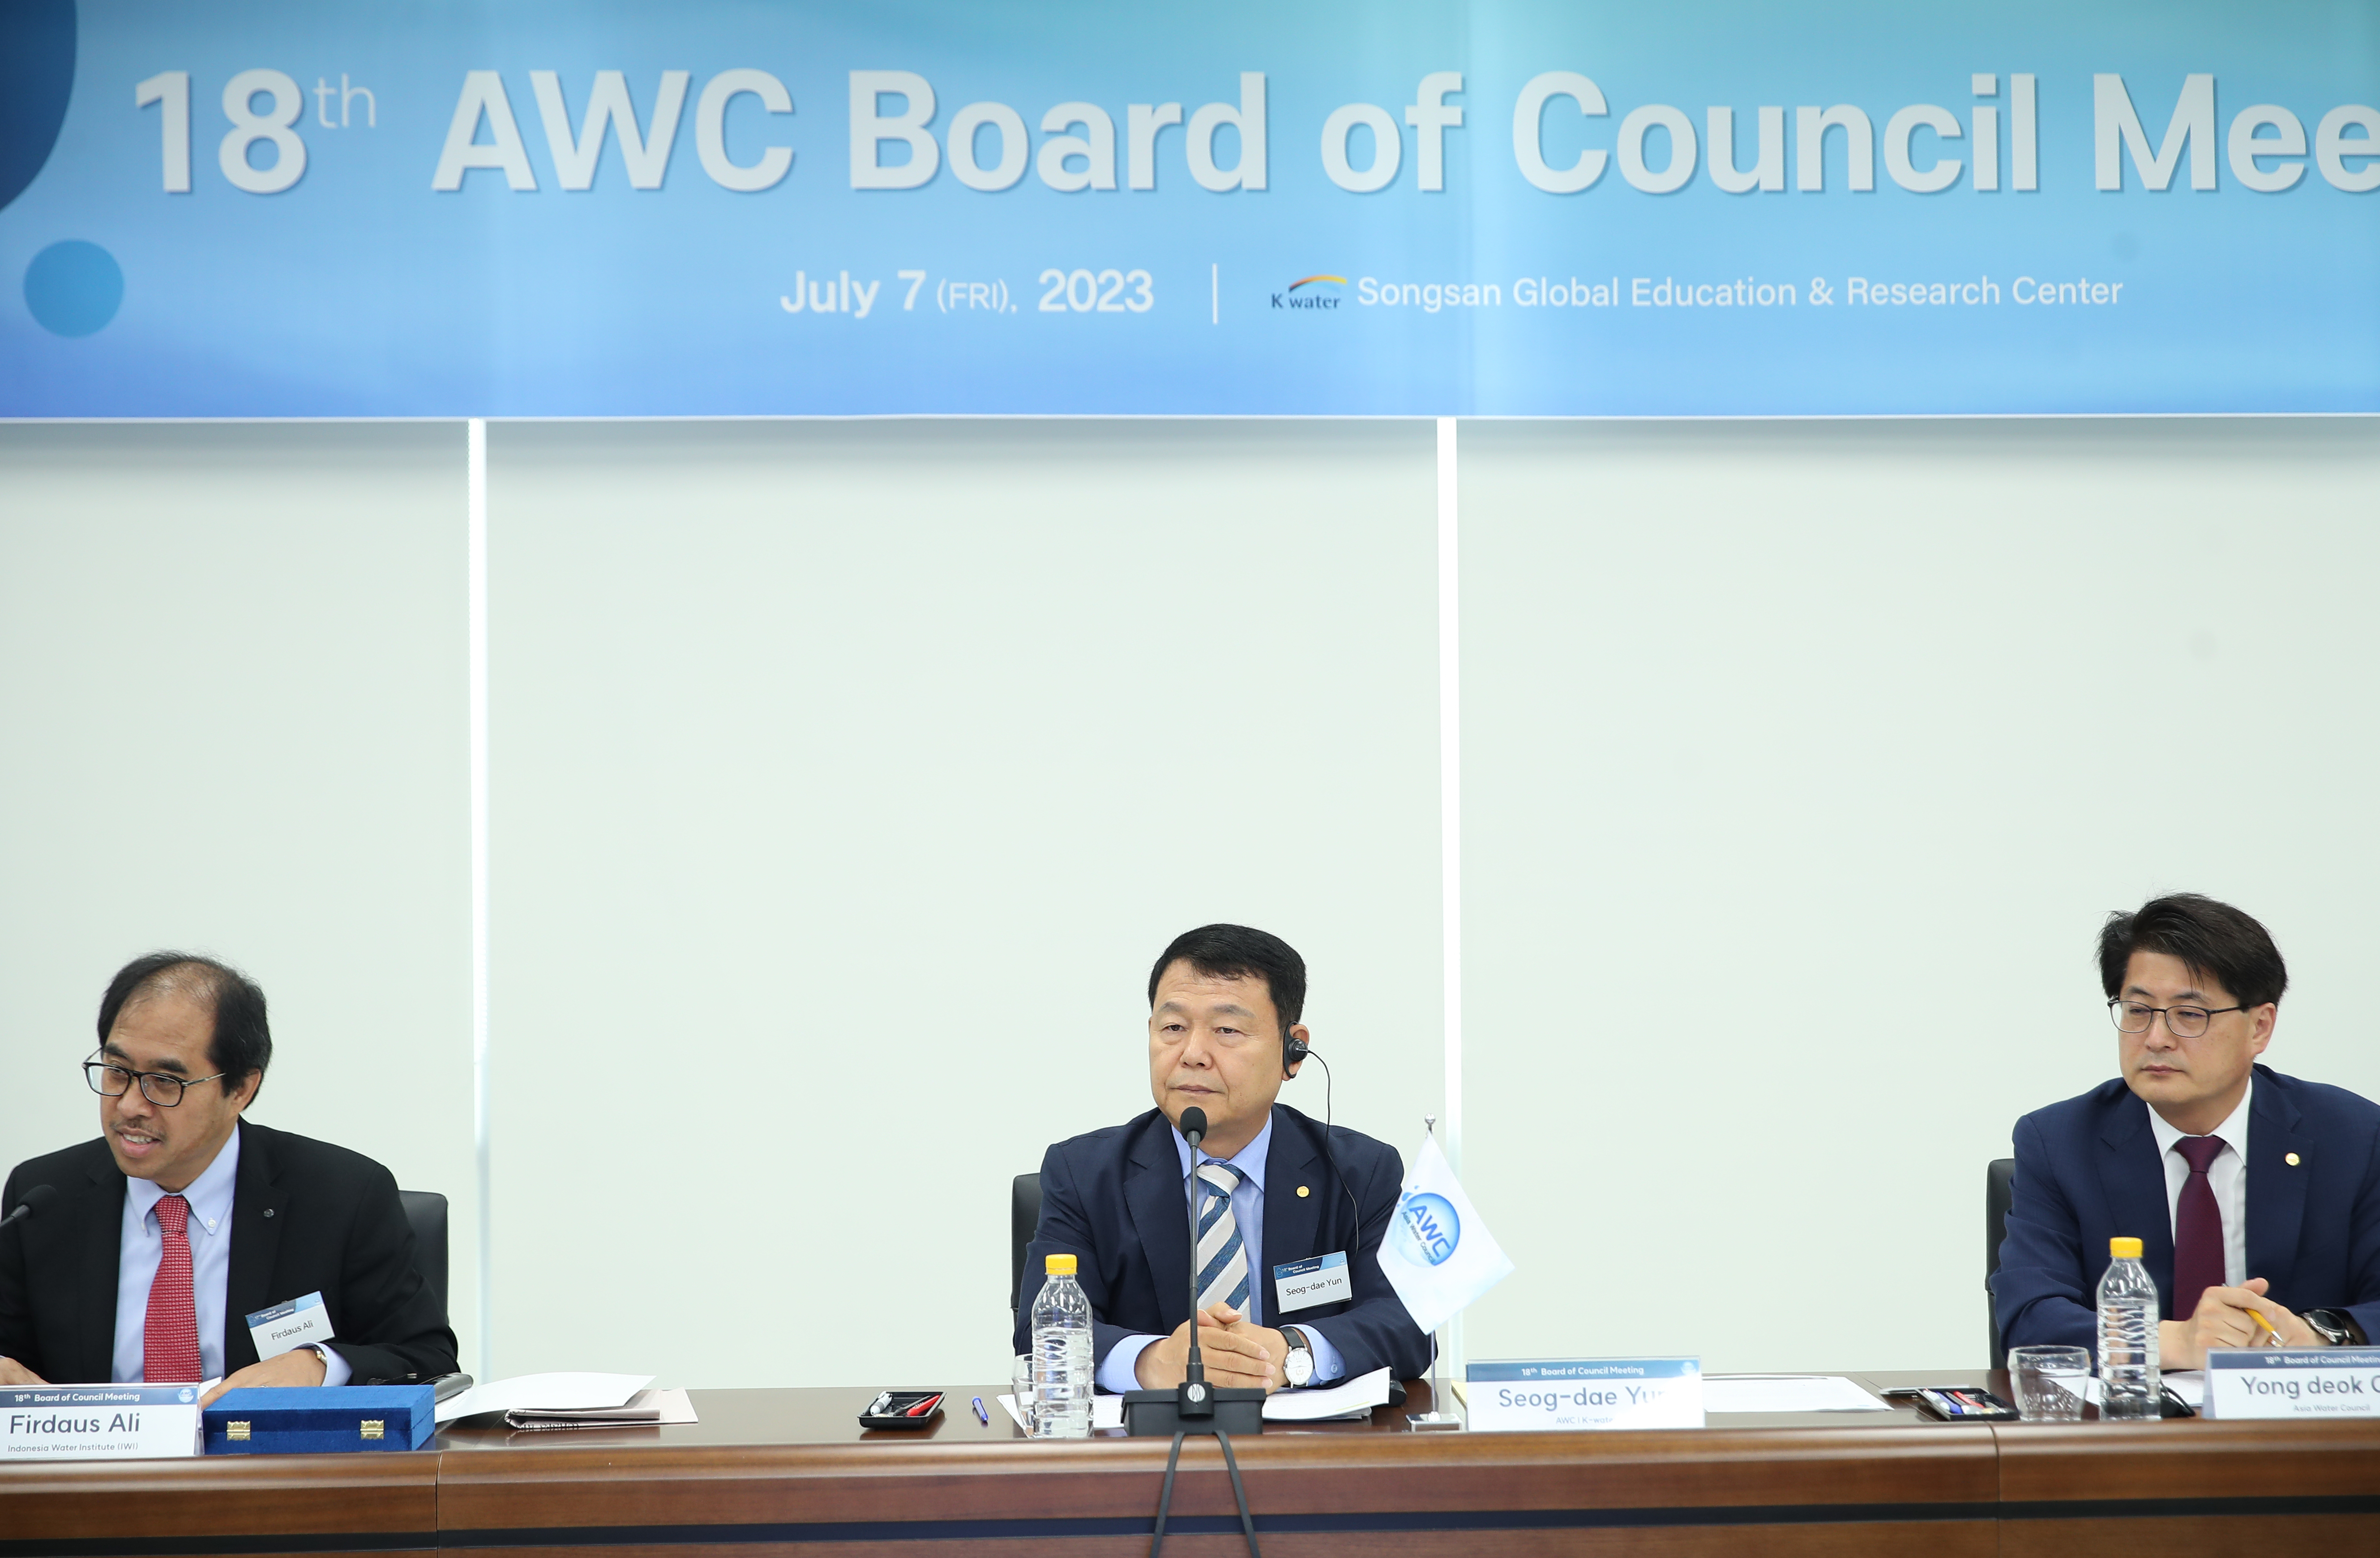 AWC Board of Council Meeting